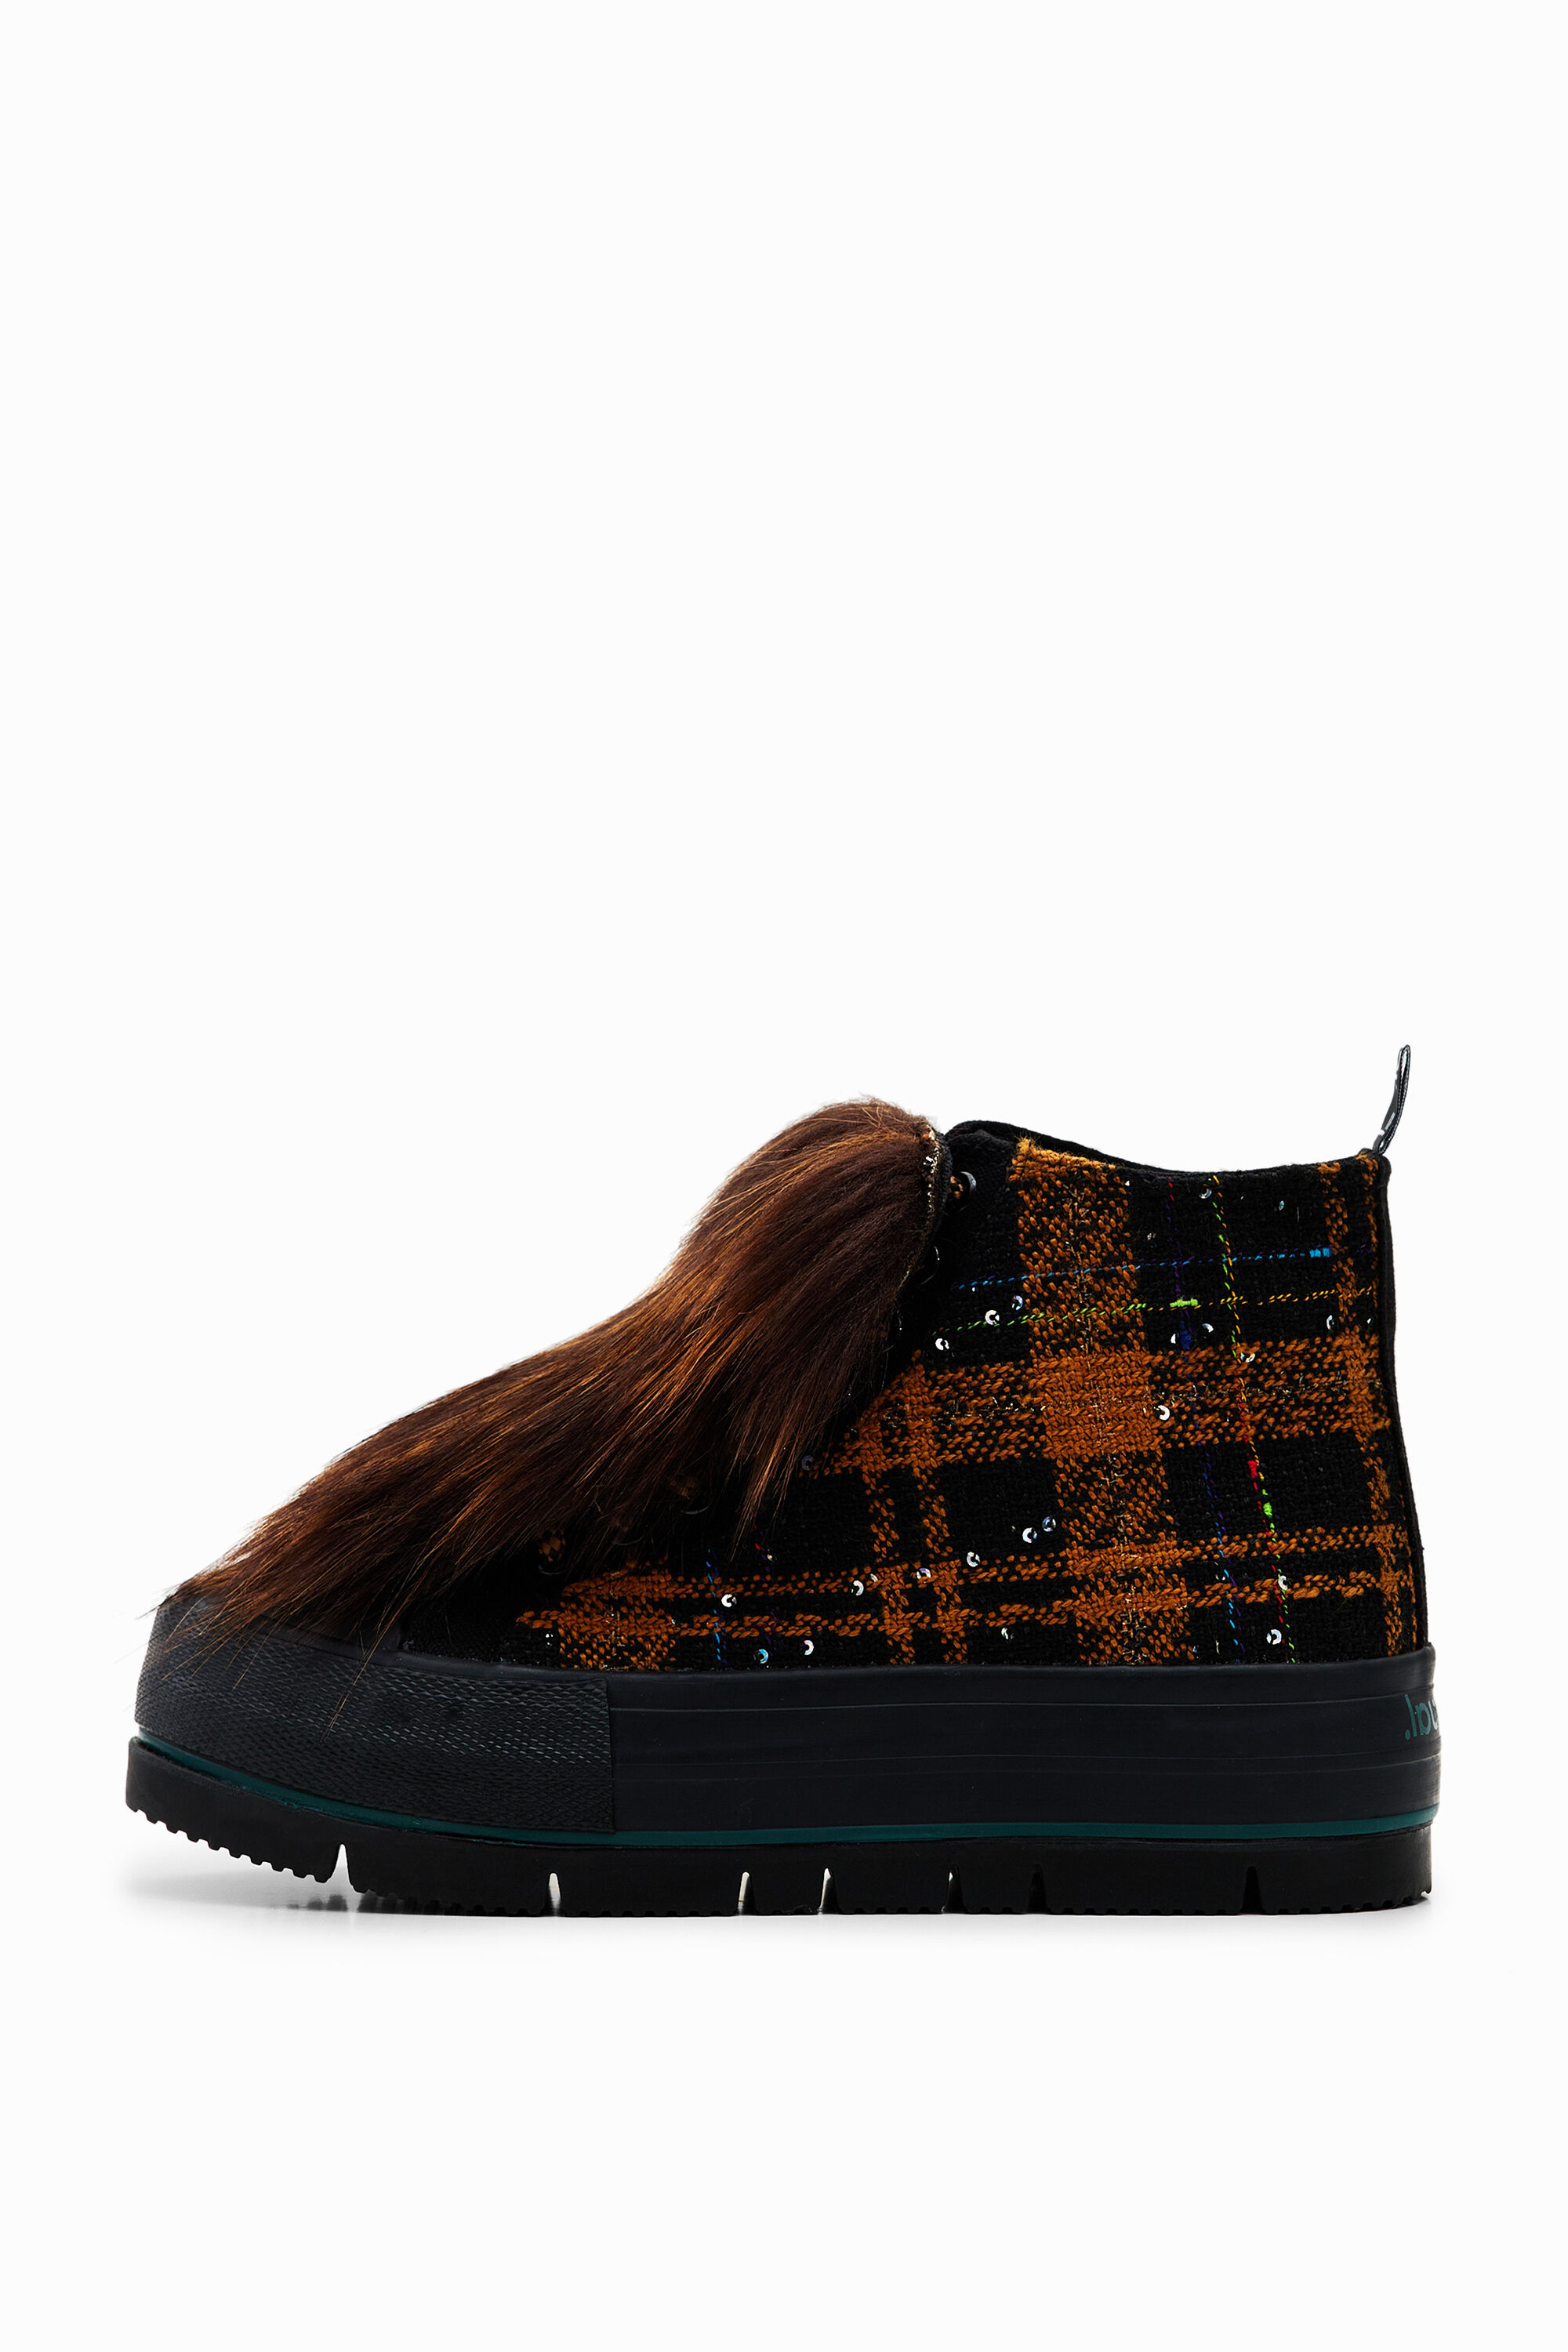 Fur platform high-top sneakers - MATERIAL FINISHES - 36